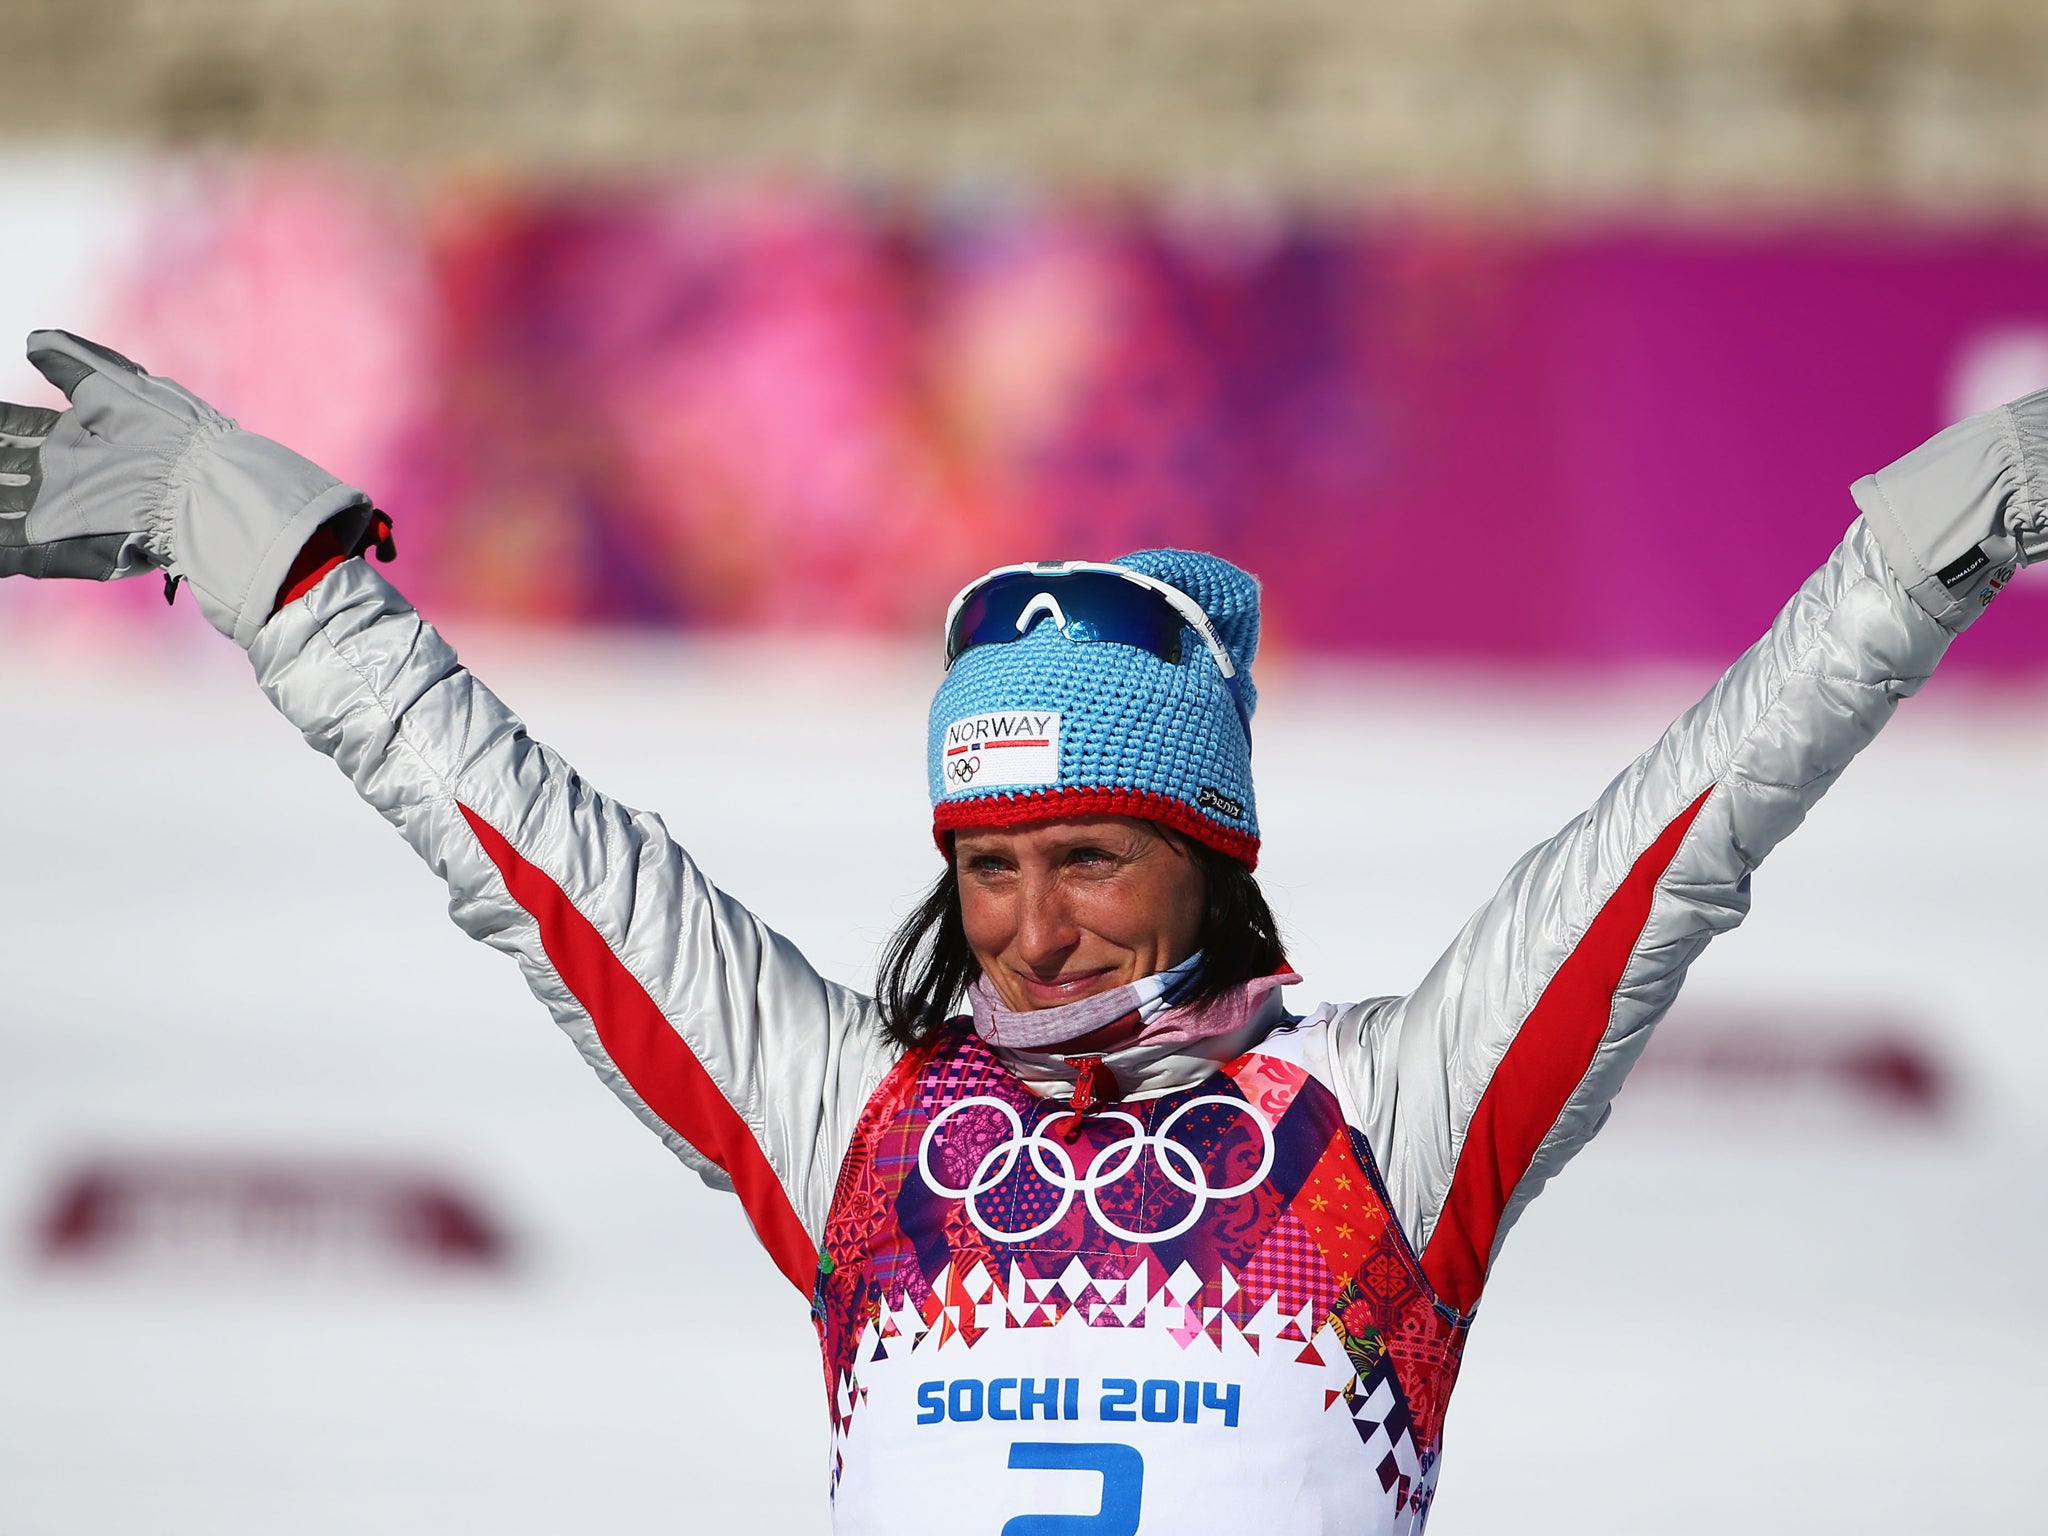 Marit Bjoergen took gold for Norway in the cross country skiing